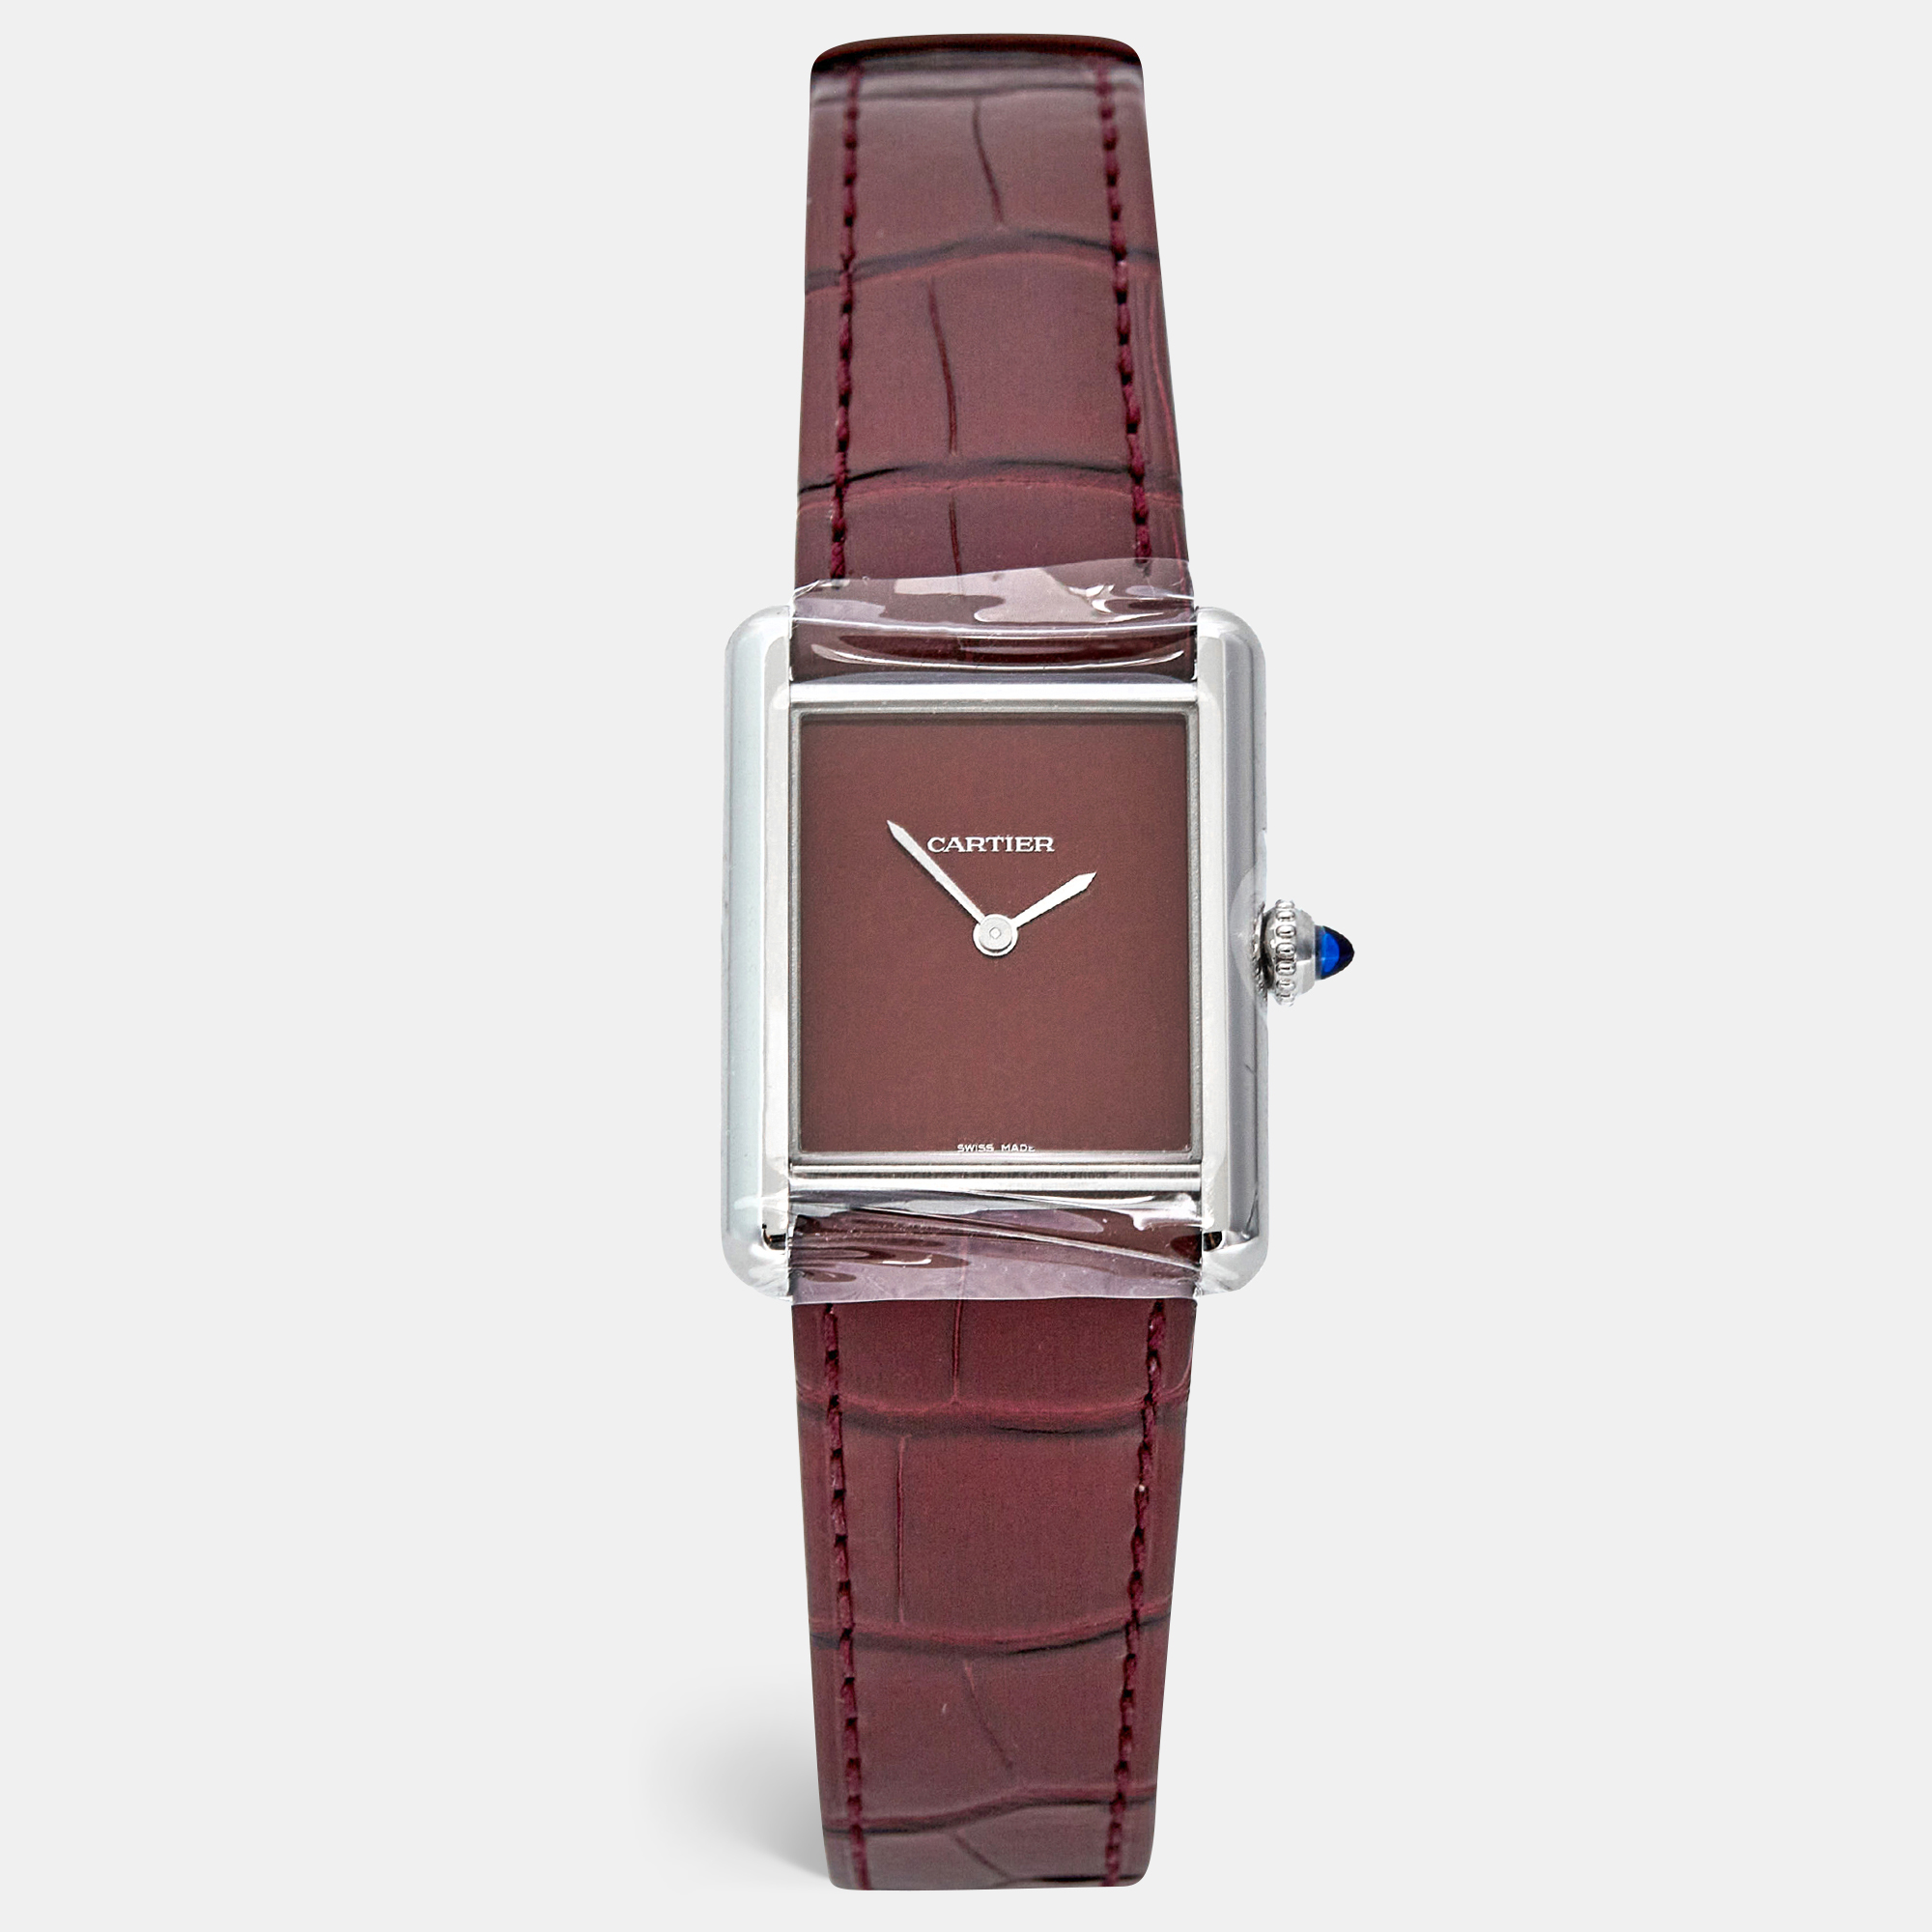 Pre-owned Cartier Tank Must Stainless Steel Quartz Large Model Claret Dial Wsta0054 Men's Watch 33.7 Mm X 25.5 Mm In Red